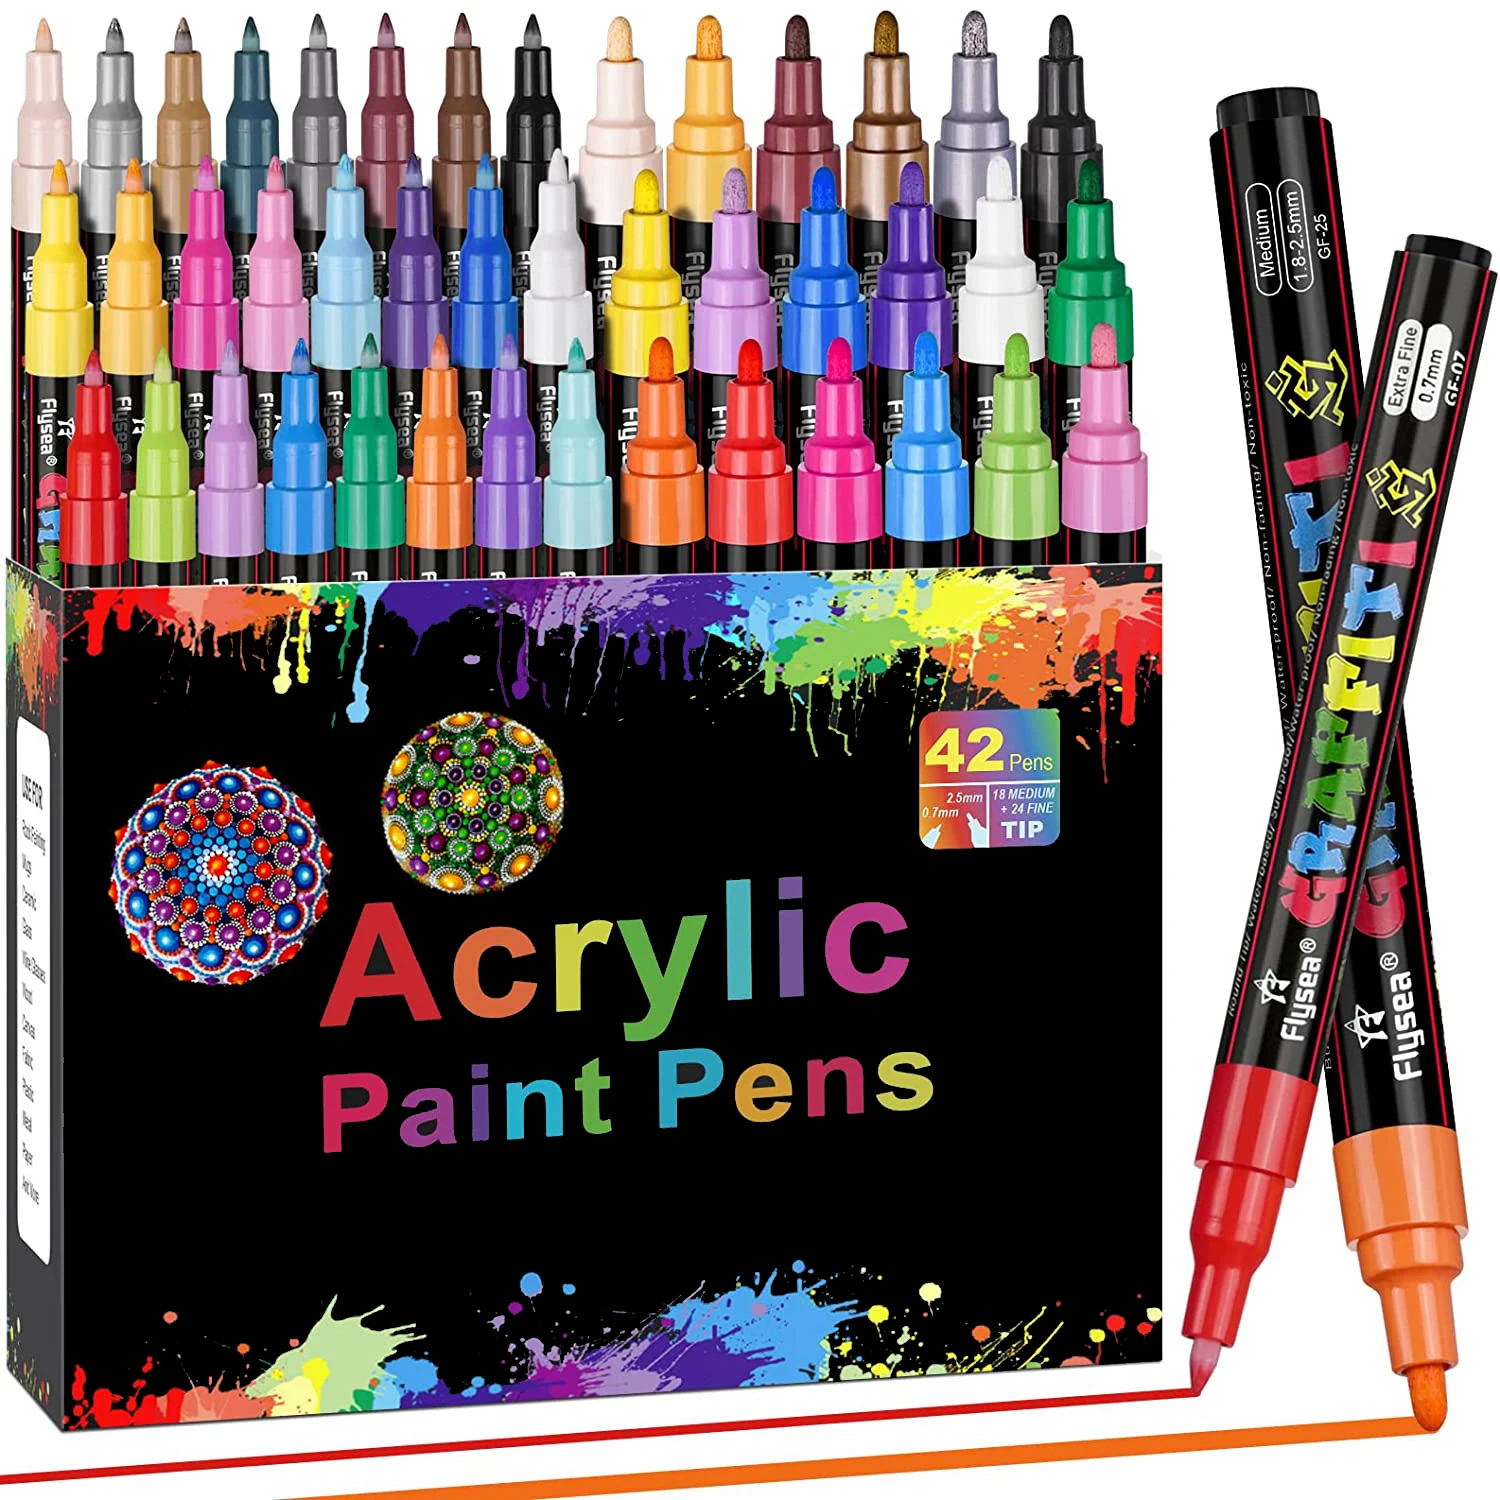 Premium Paint Pen Acrylic Paint Marker 0.7mm Fine Point and 2.0mm Middle Tip Acrylic Art Marker for All Surfaces Art Supplies